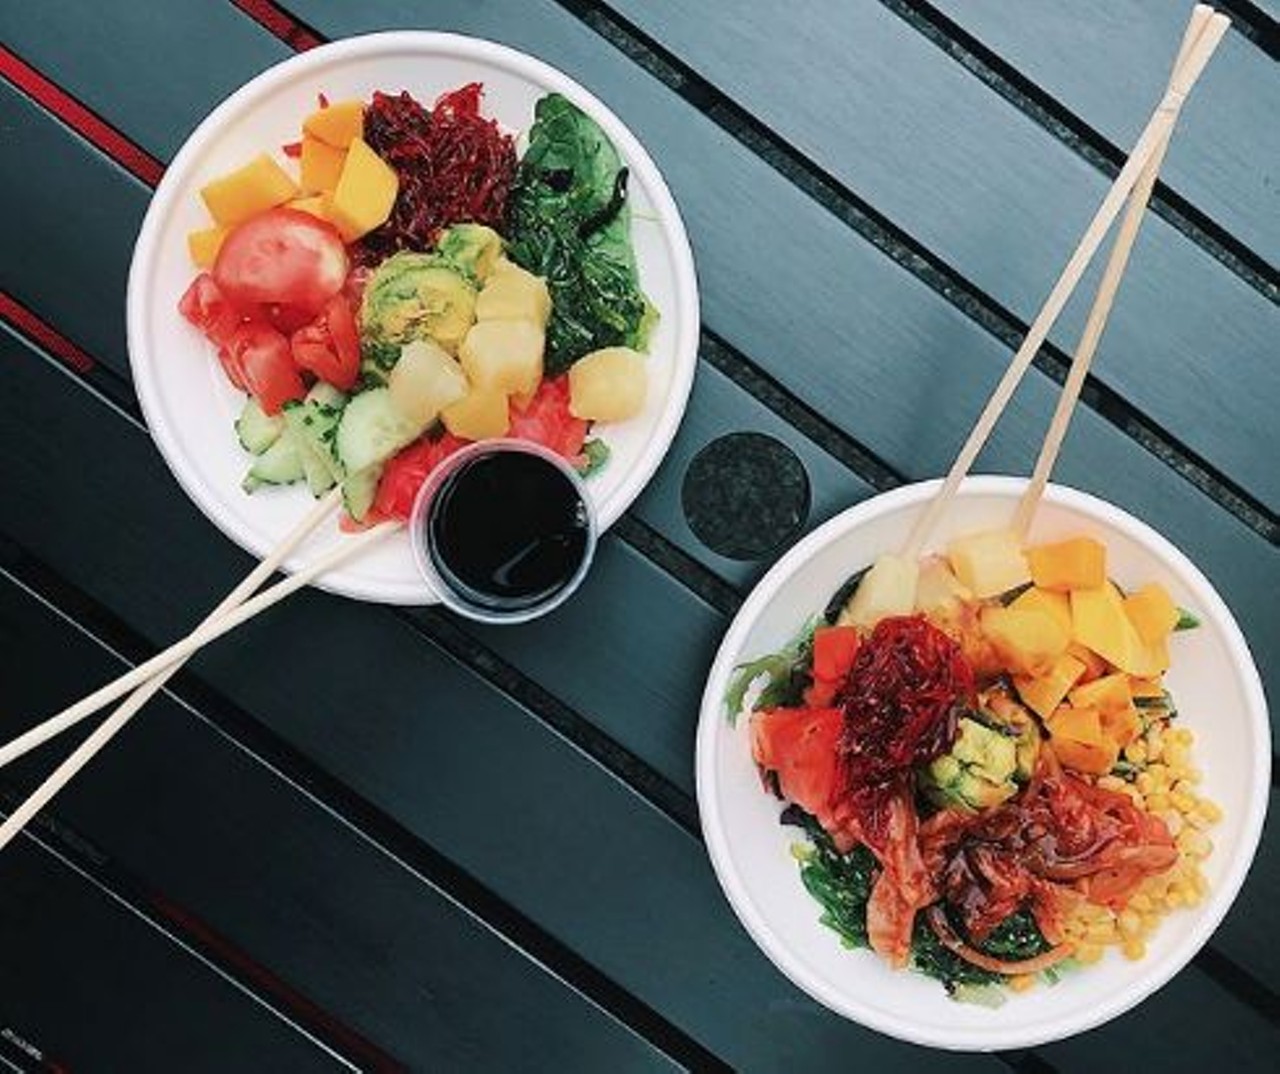  Corner 11 Bowl & Wrap 
2391 W. 11th St. | (216) 713-1757
Fresh ingredients and custom poke bowls await you at this new fast-casual, Hawaiian-Asian eatery. Some soups featuring noodles and wontons are also offered.
Photo via puchaa/Instagram